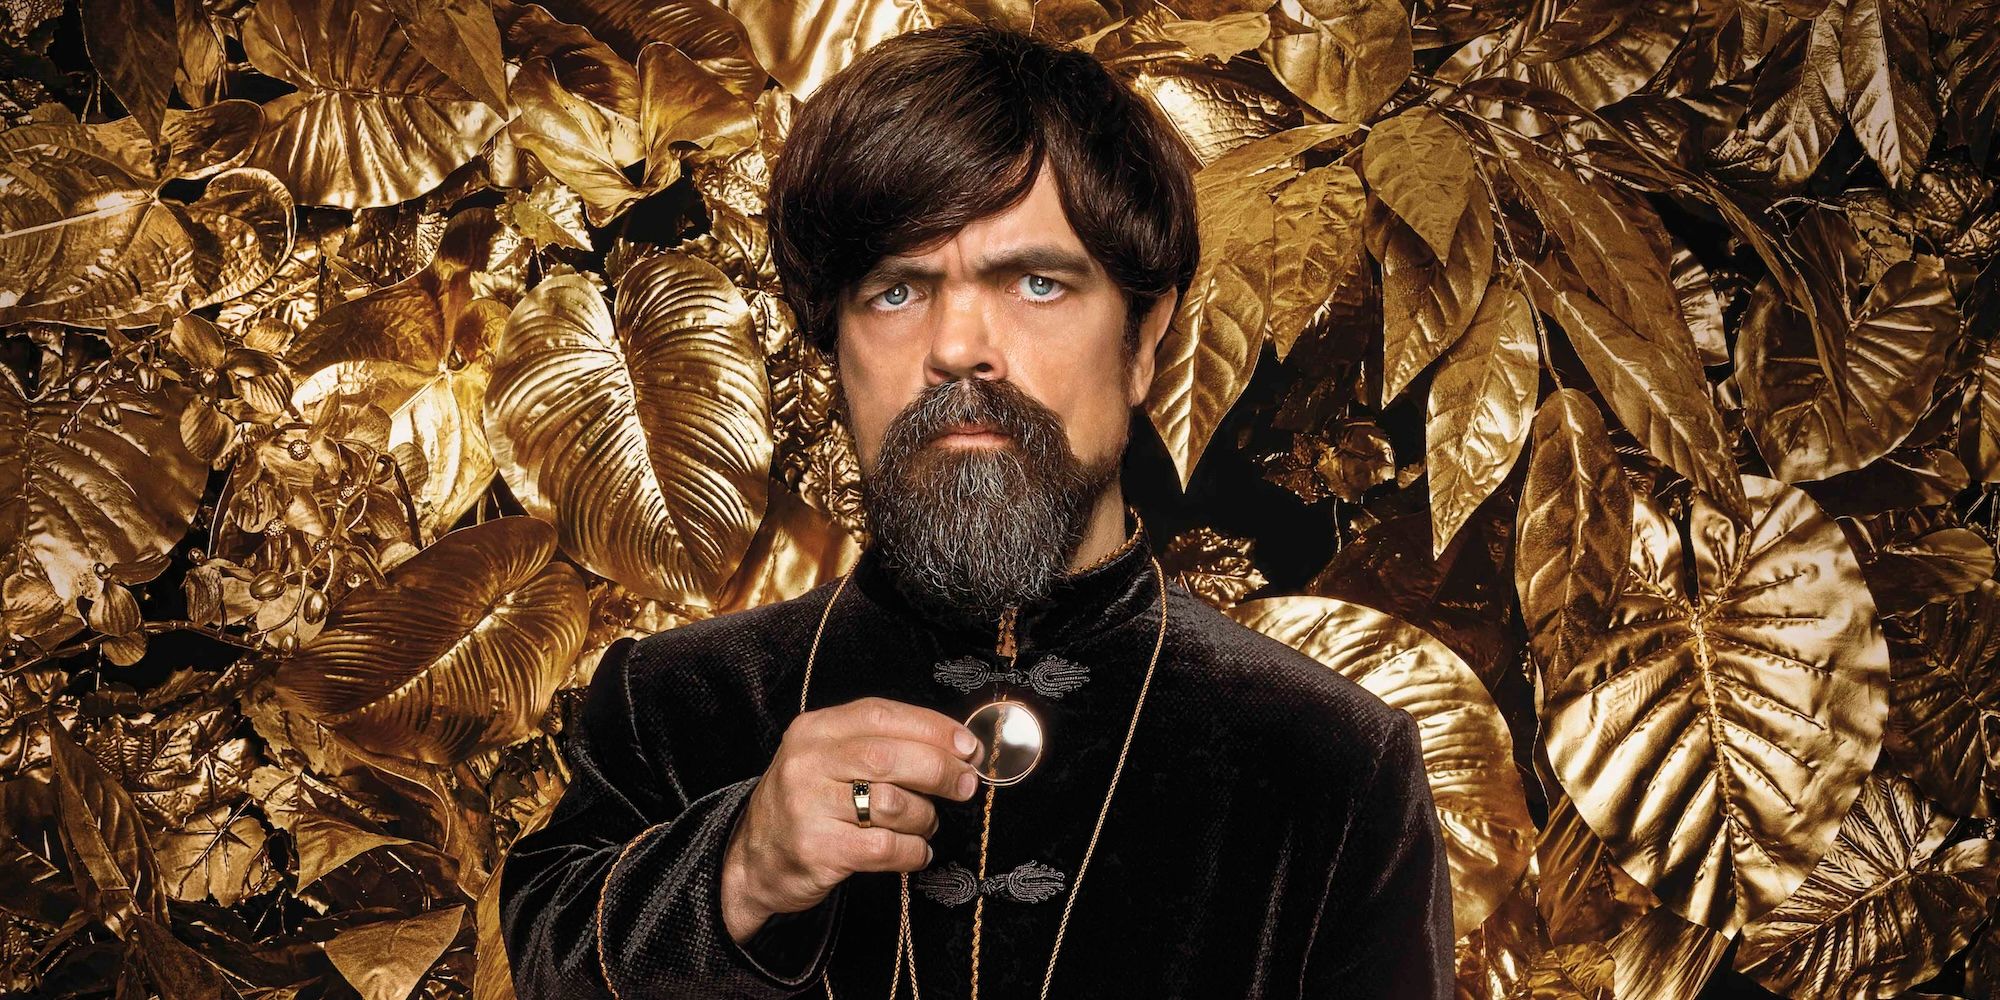 peter dinklage as dean highbottom in the ballad of songbirds and snakes